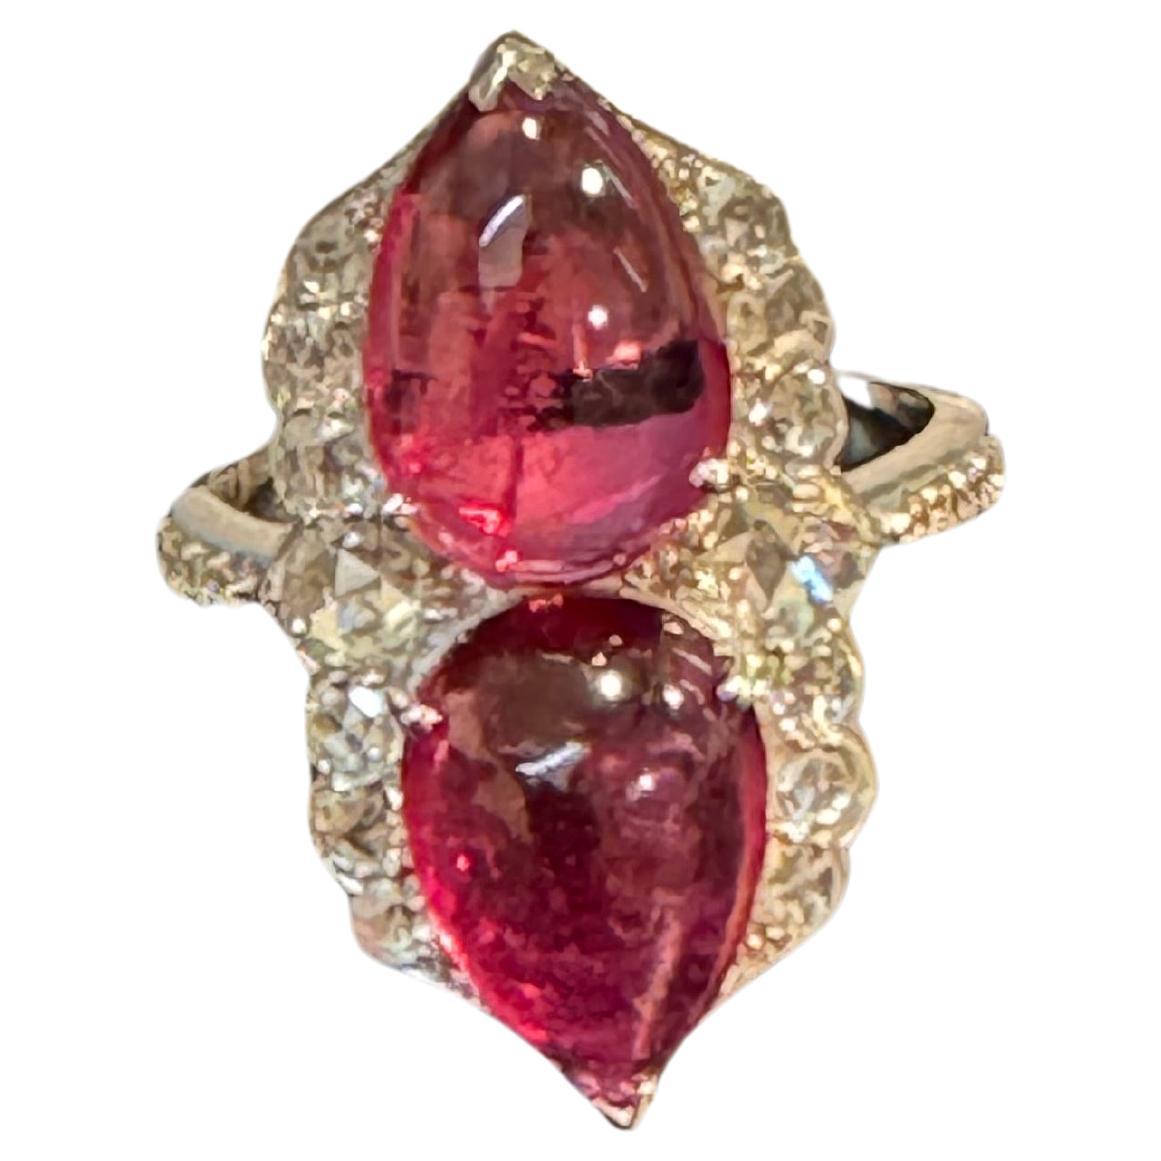 Introducing a timeless classic, the Cocktail Ring features a stunning 7 Ct Finest Rubelite with 2 Cabochons in pear shape and 1 Carat Diamond set in 18 Kt White Gold. Crafted with exquisite detail, this piece weighs 5.3 grams and is currently a size